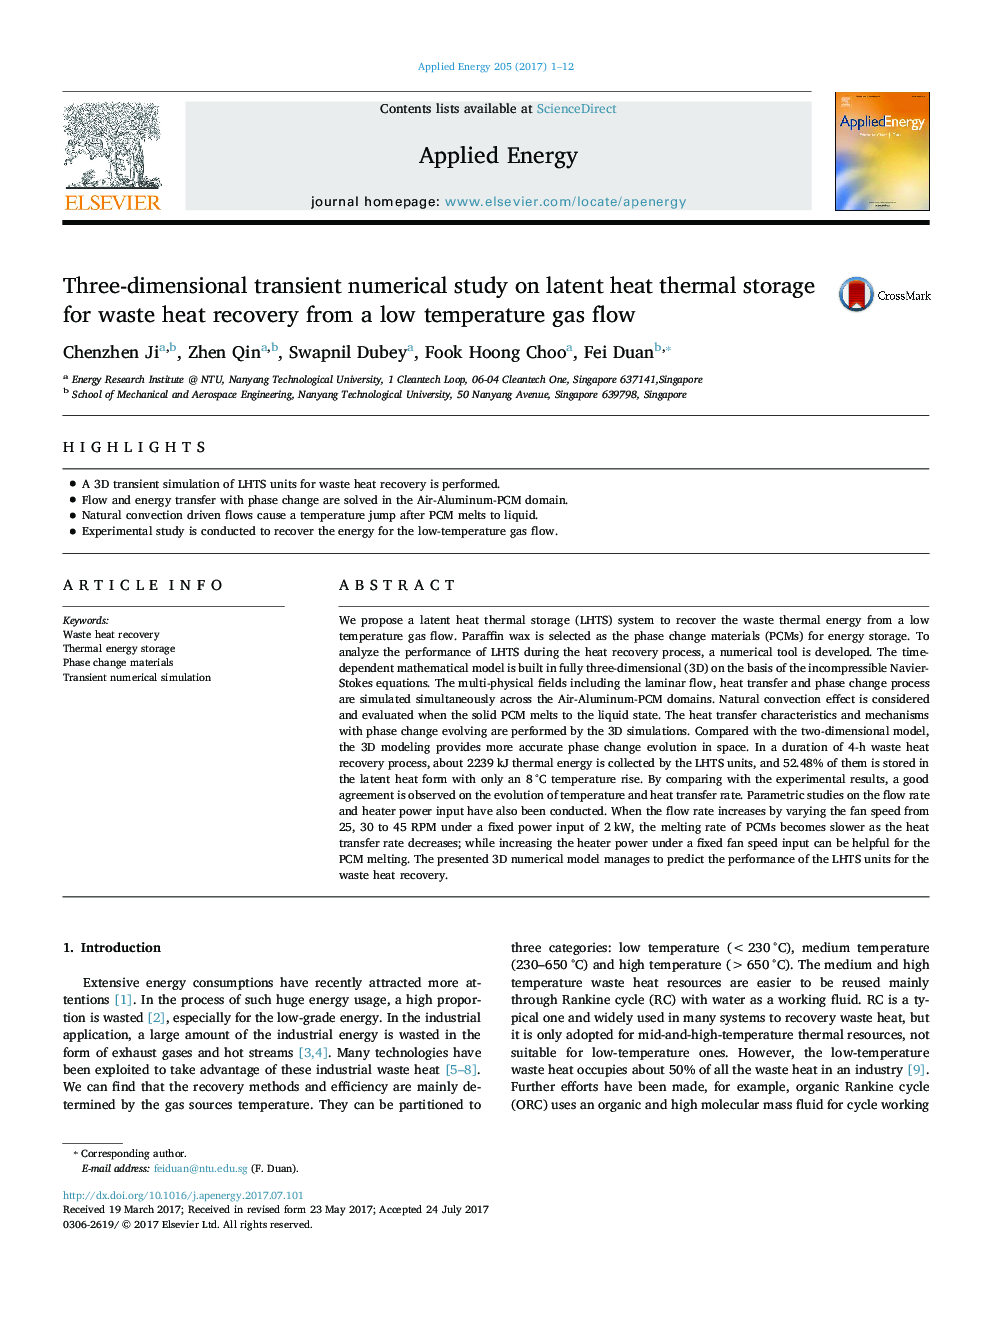 Three-dimensional transient numerical study on latent heat thermal storage for waste heat recovery from a low temperature gas flow